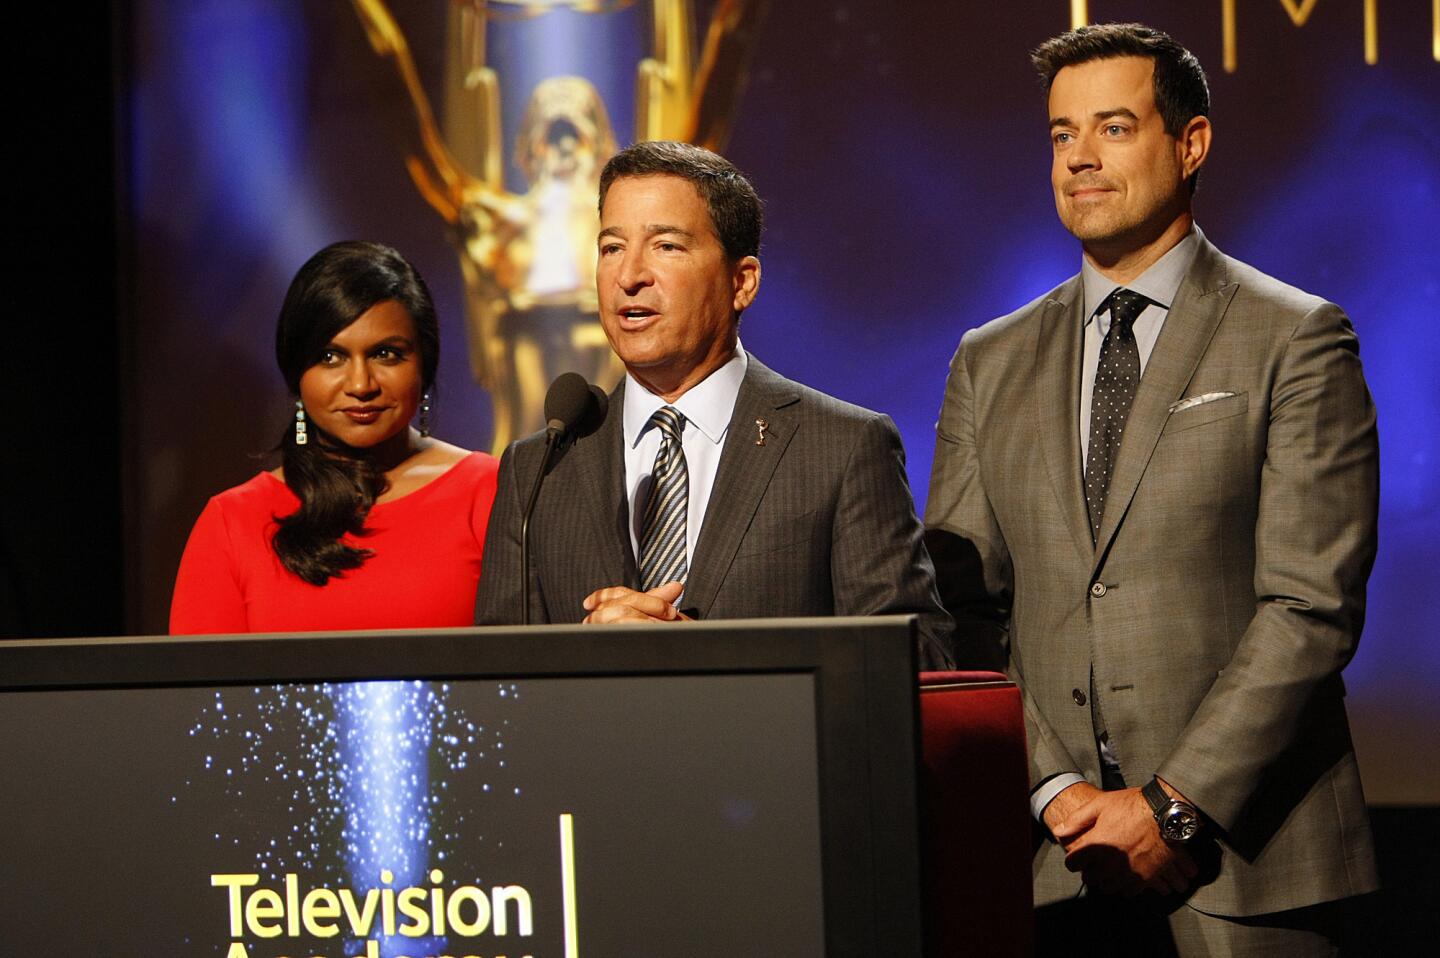 Emmy Awards nominations for 2014 announced